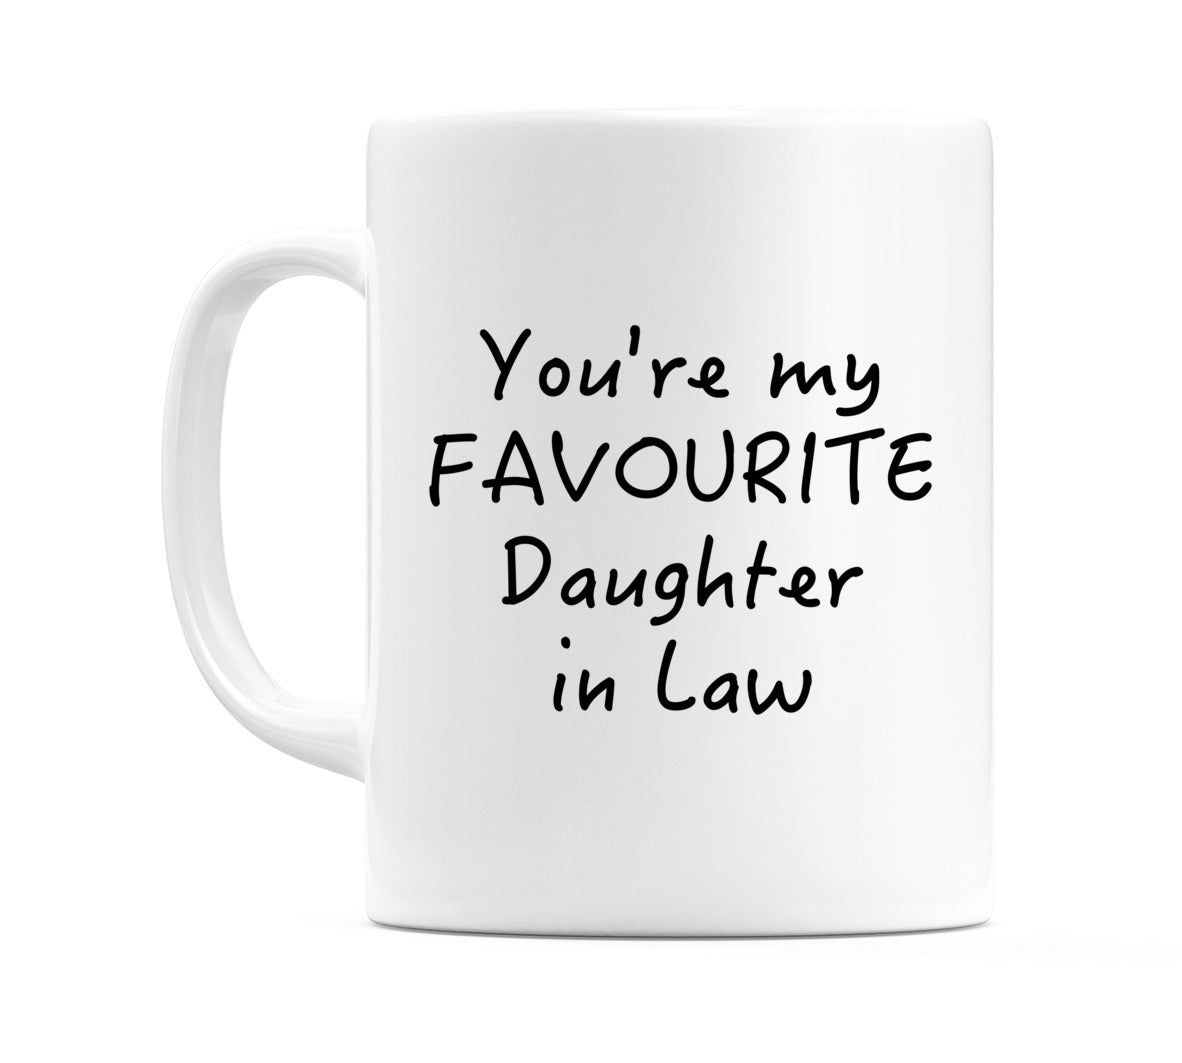 You're My Favourite Daughter in Law Mug